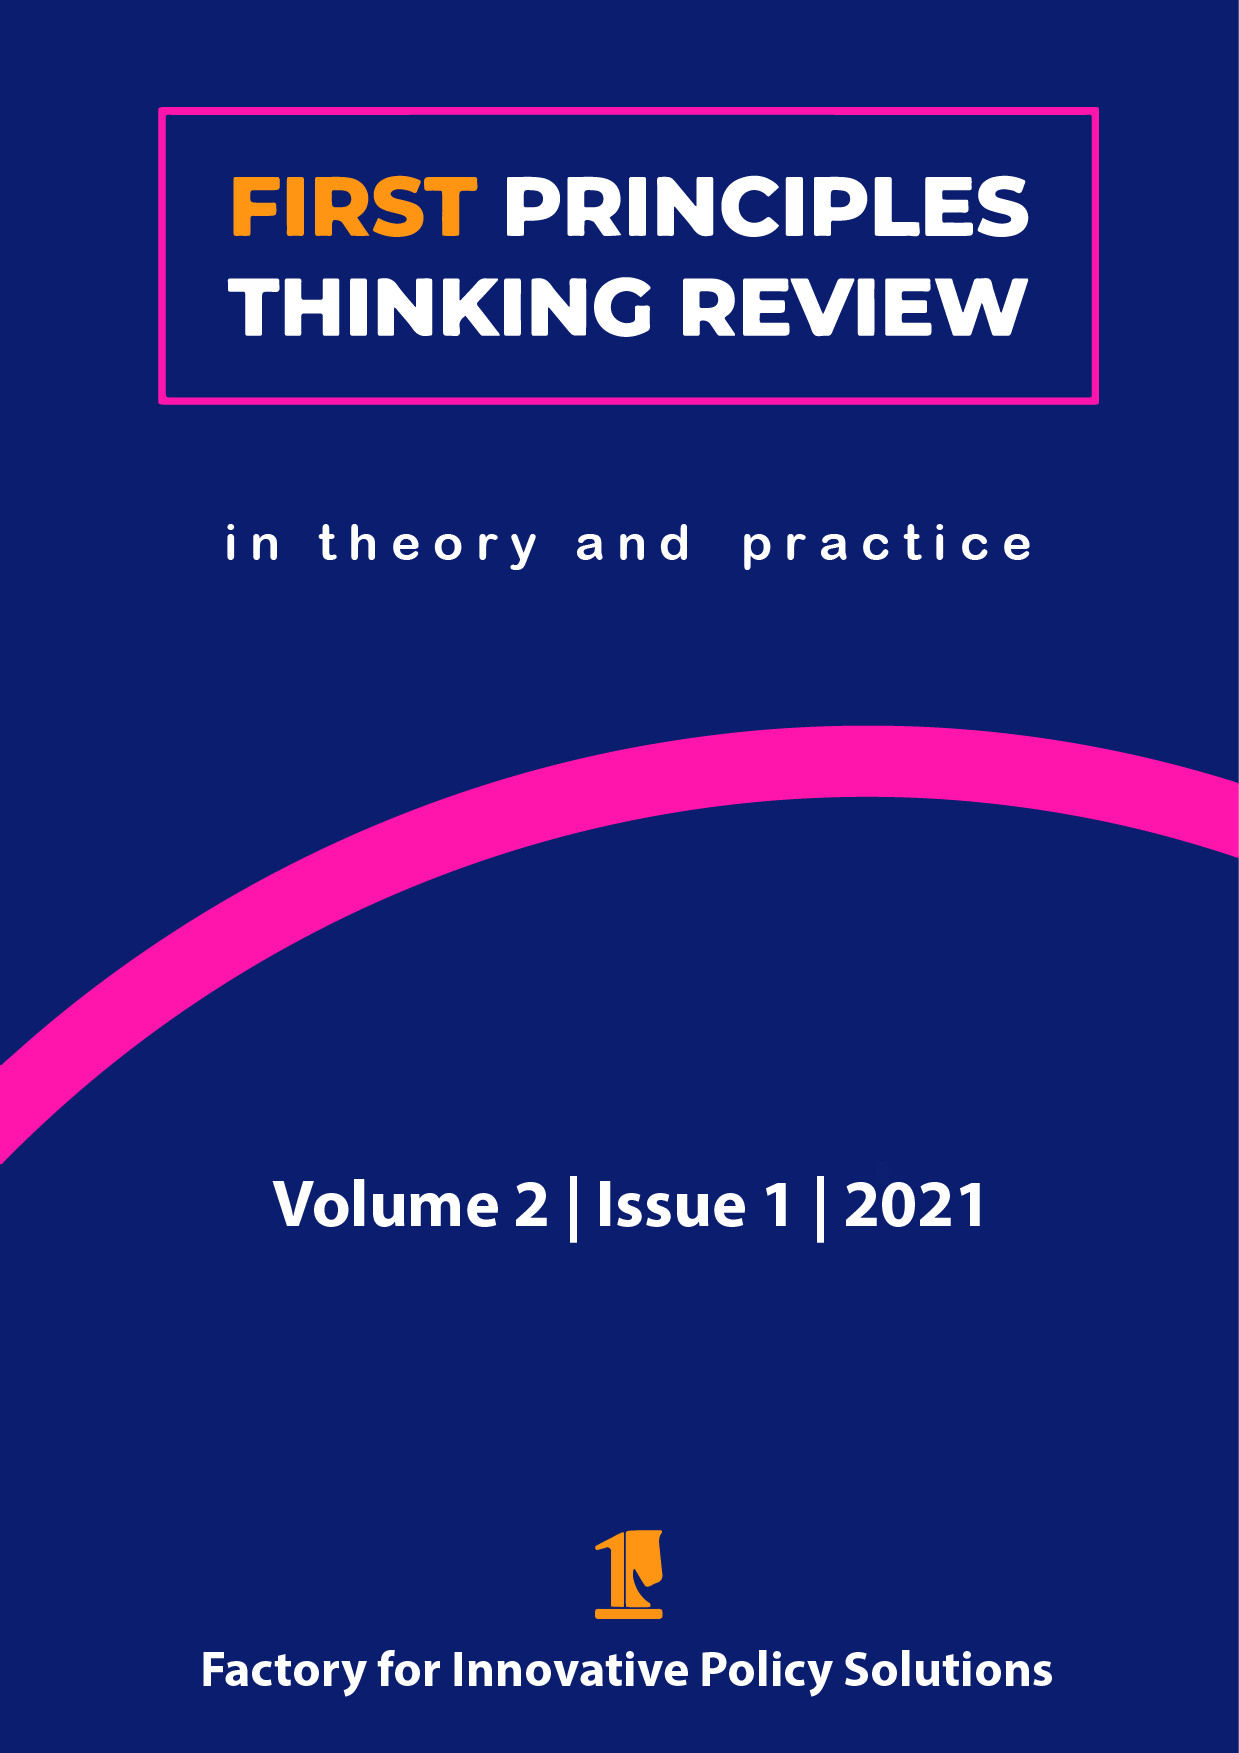 First Principles Thinking Review (Volume 2 / Issue 1) by the Factory for Innovative Policy Solutions